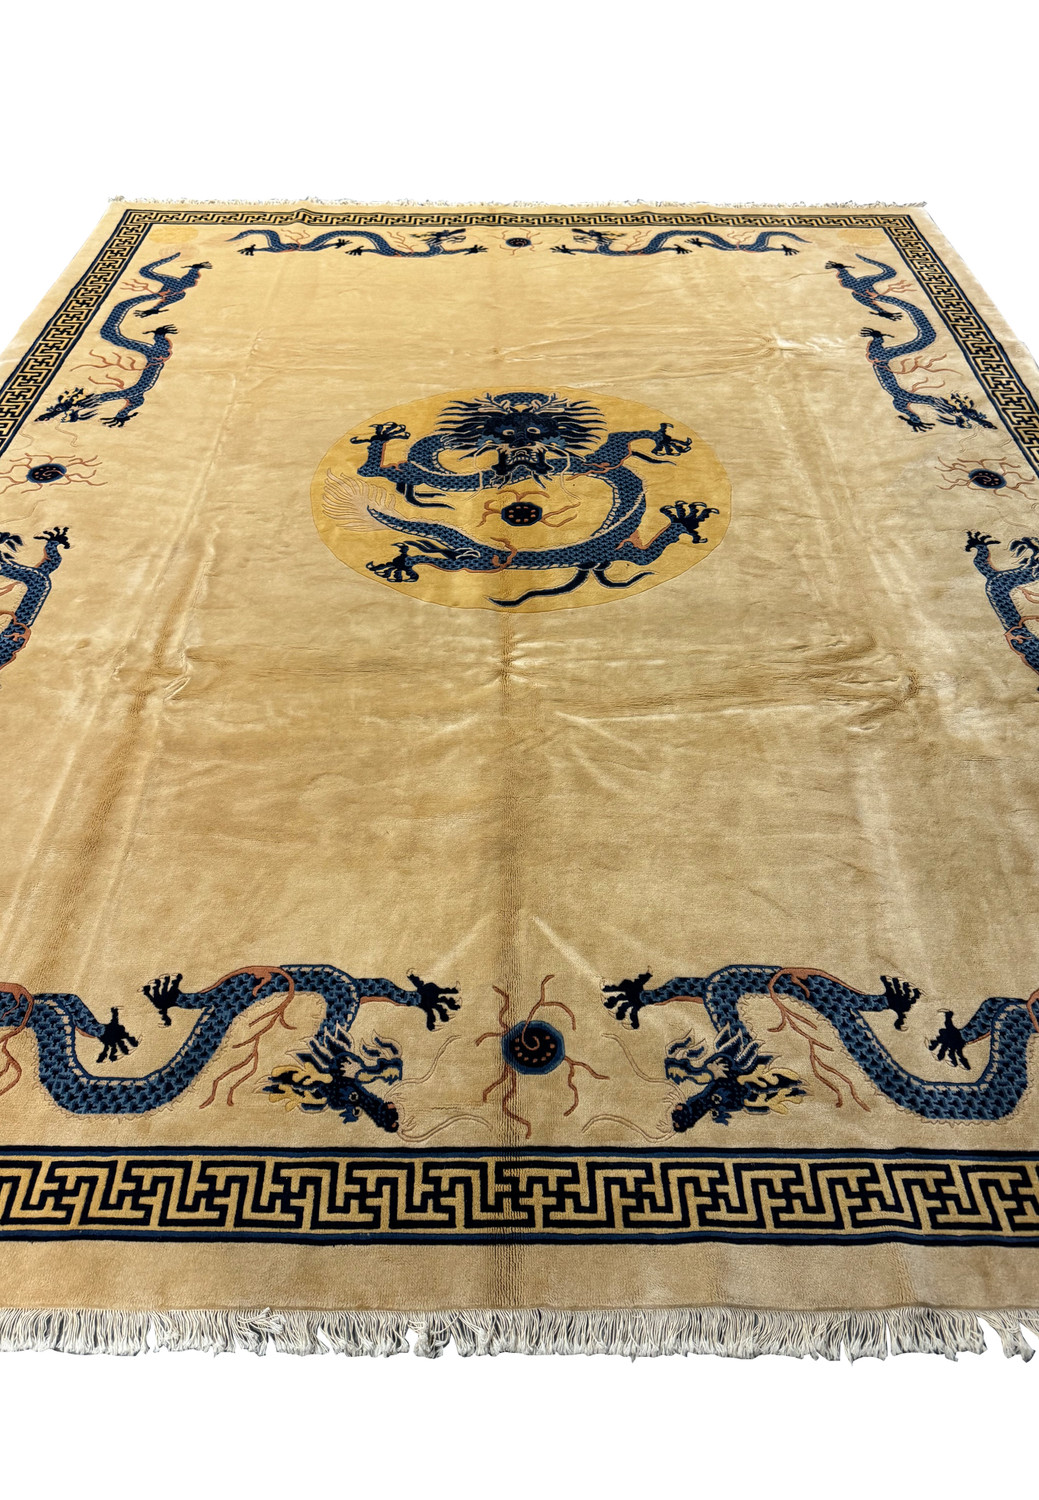 A close view of the dragon design and shimmering wool texture of the Chinese Beijing Dragon Rug